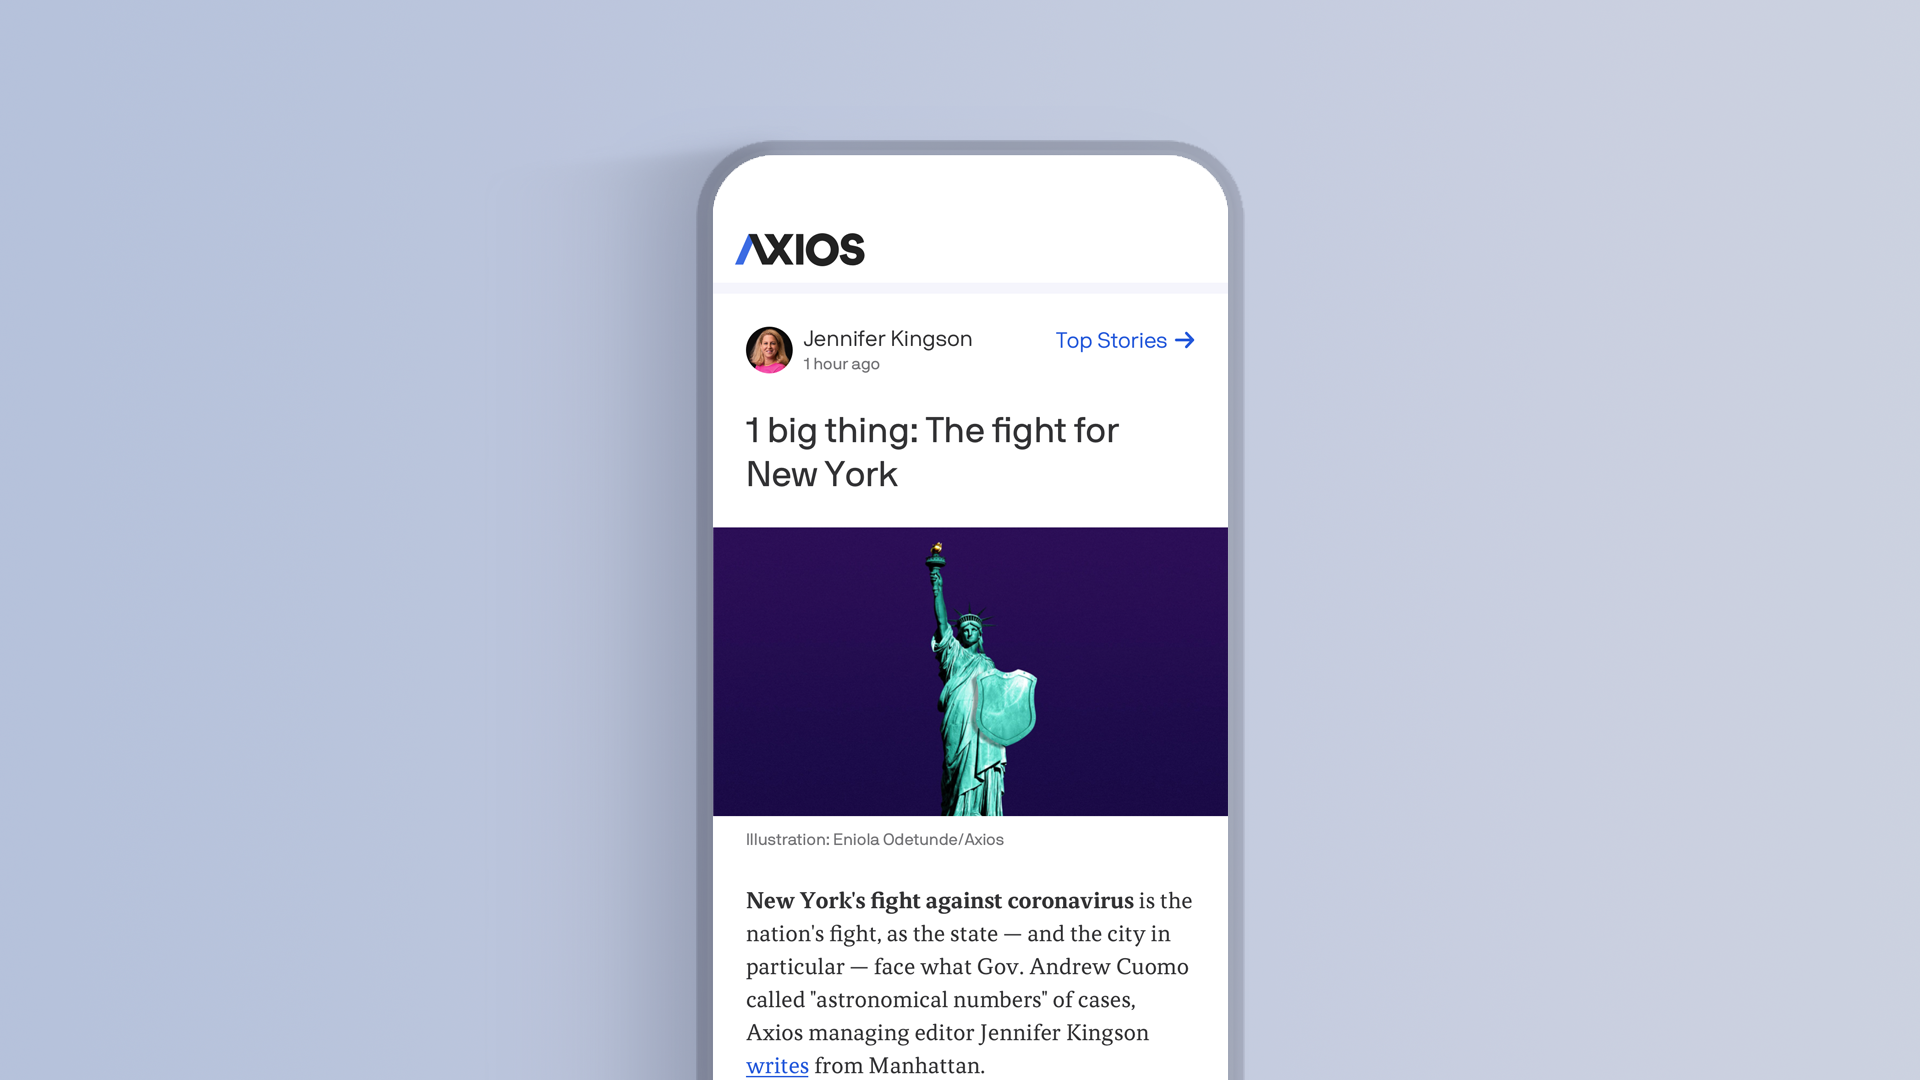 Image of the Axios news app